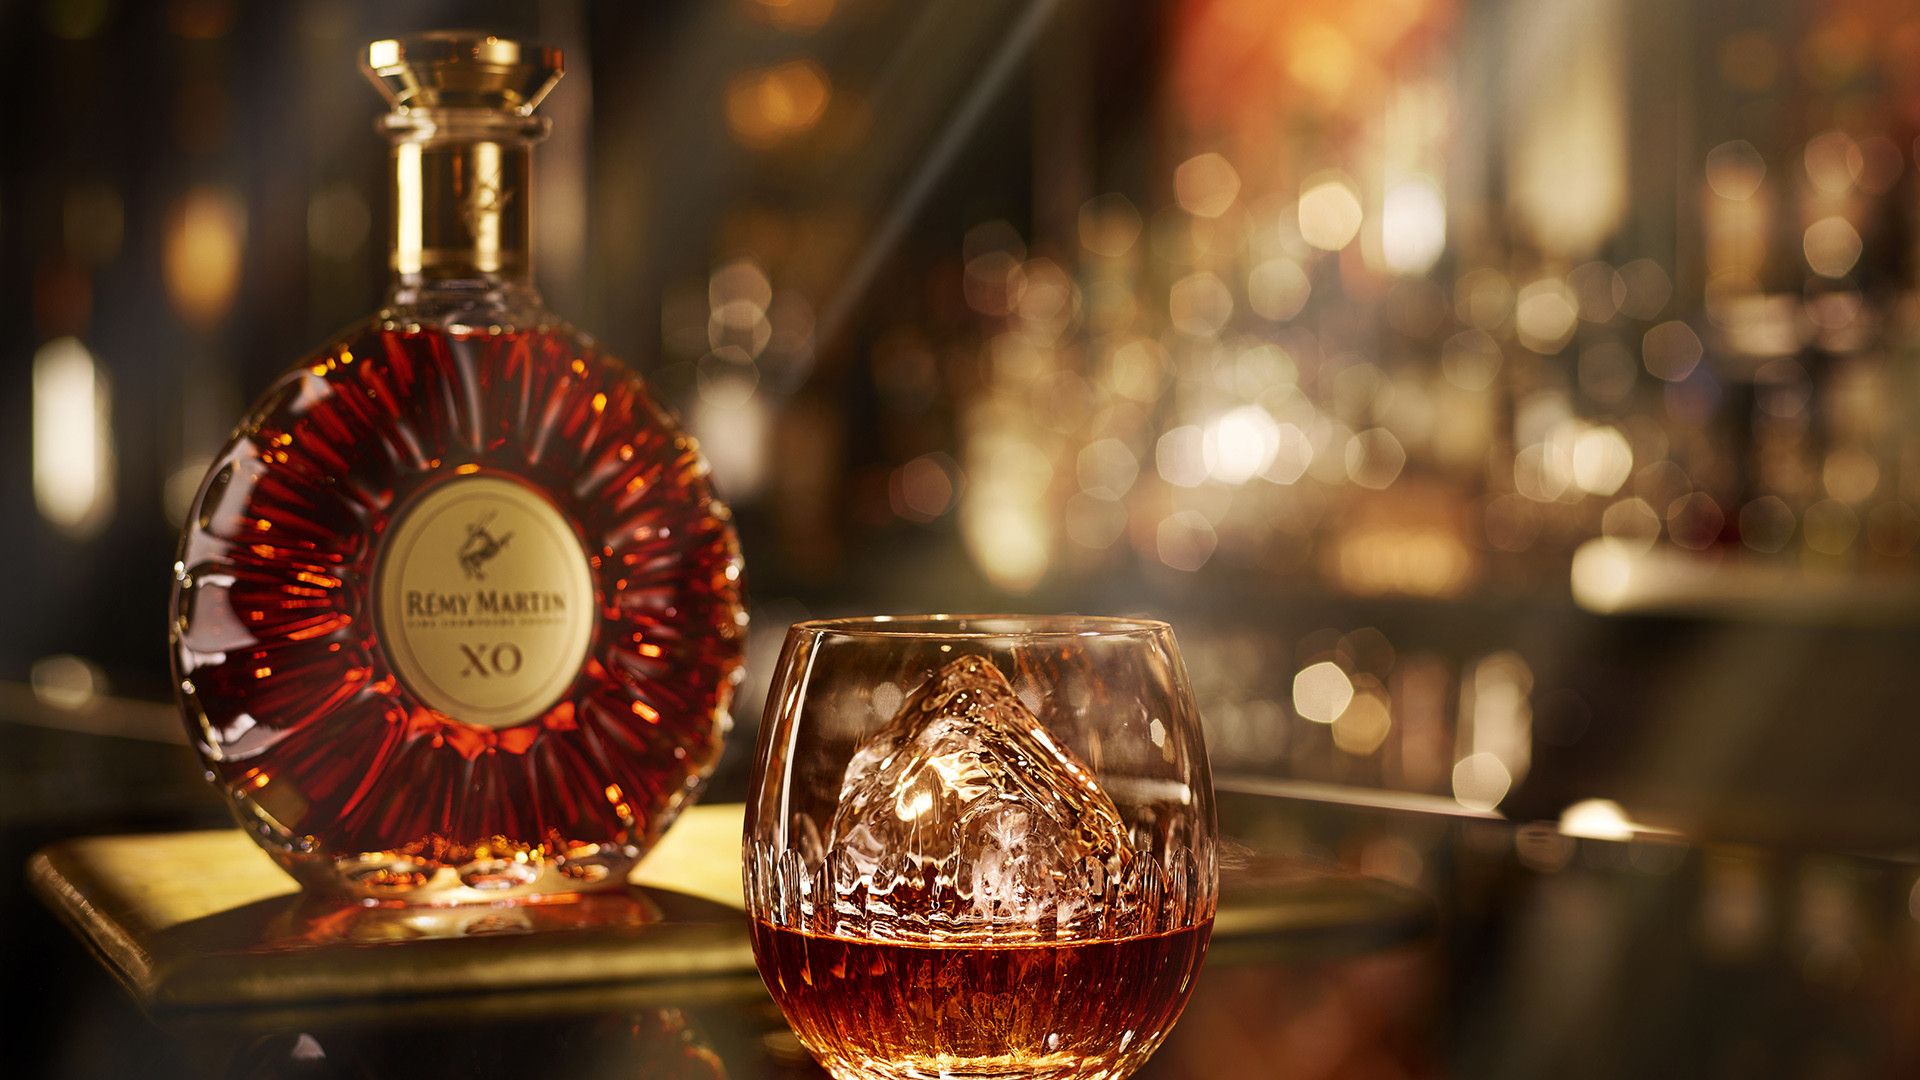 Rémy Martin: the finest cognacs from Fine Champagne